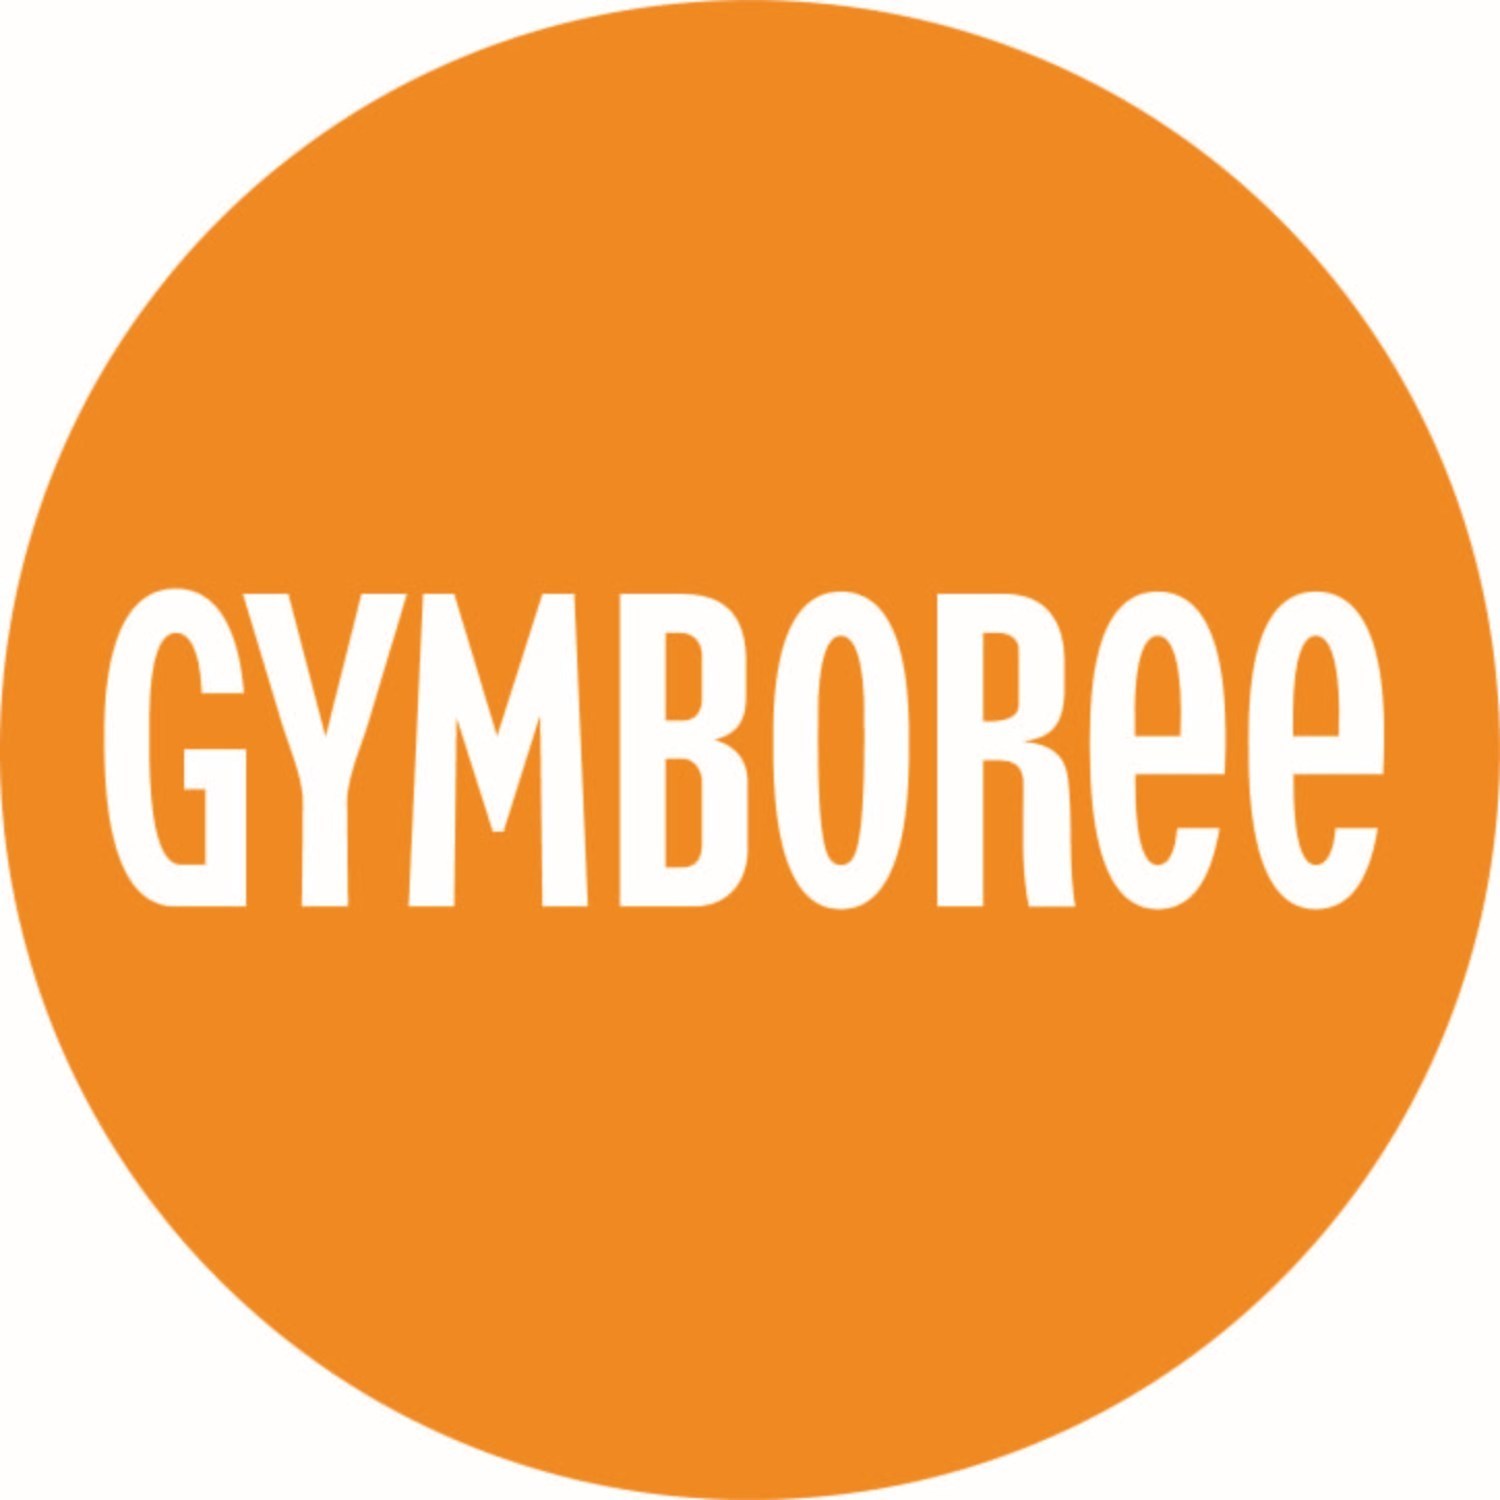 Gymboree is Now Available on